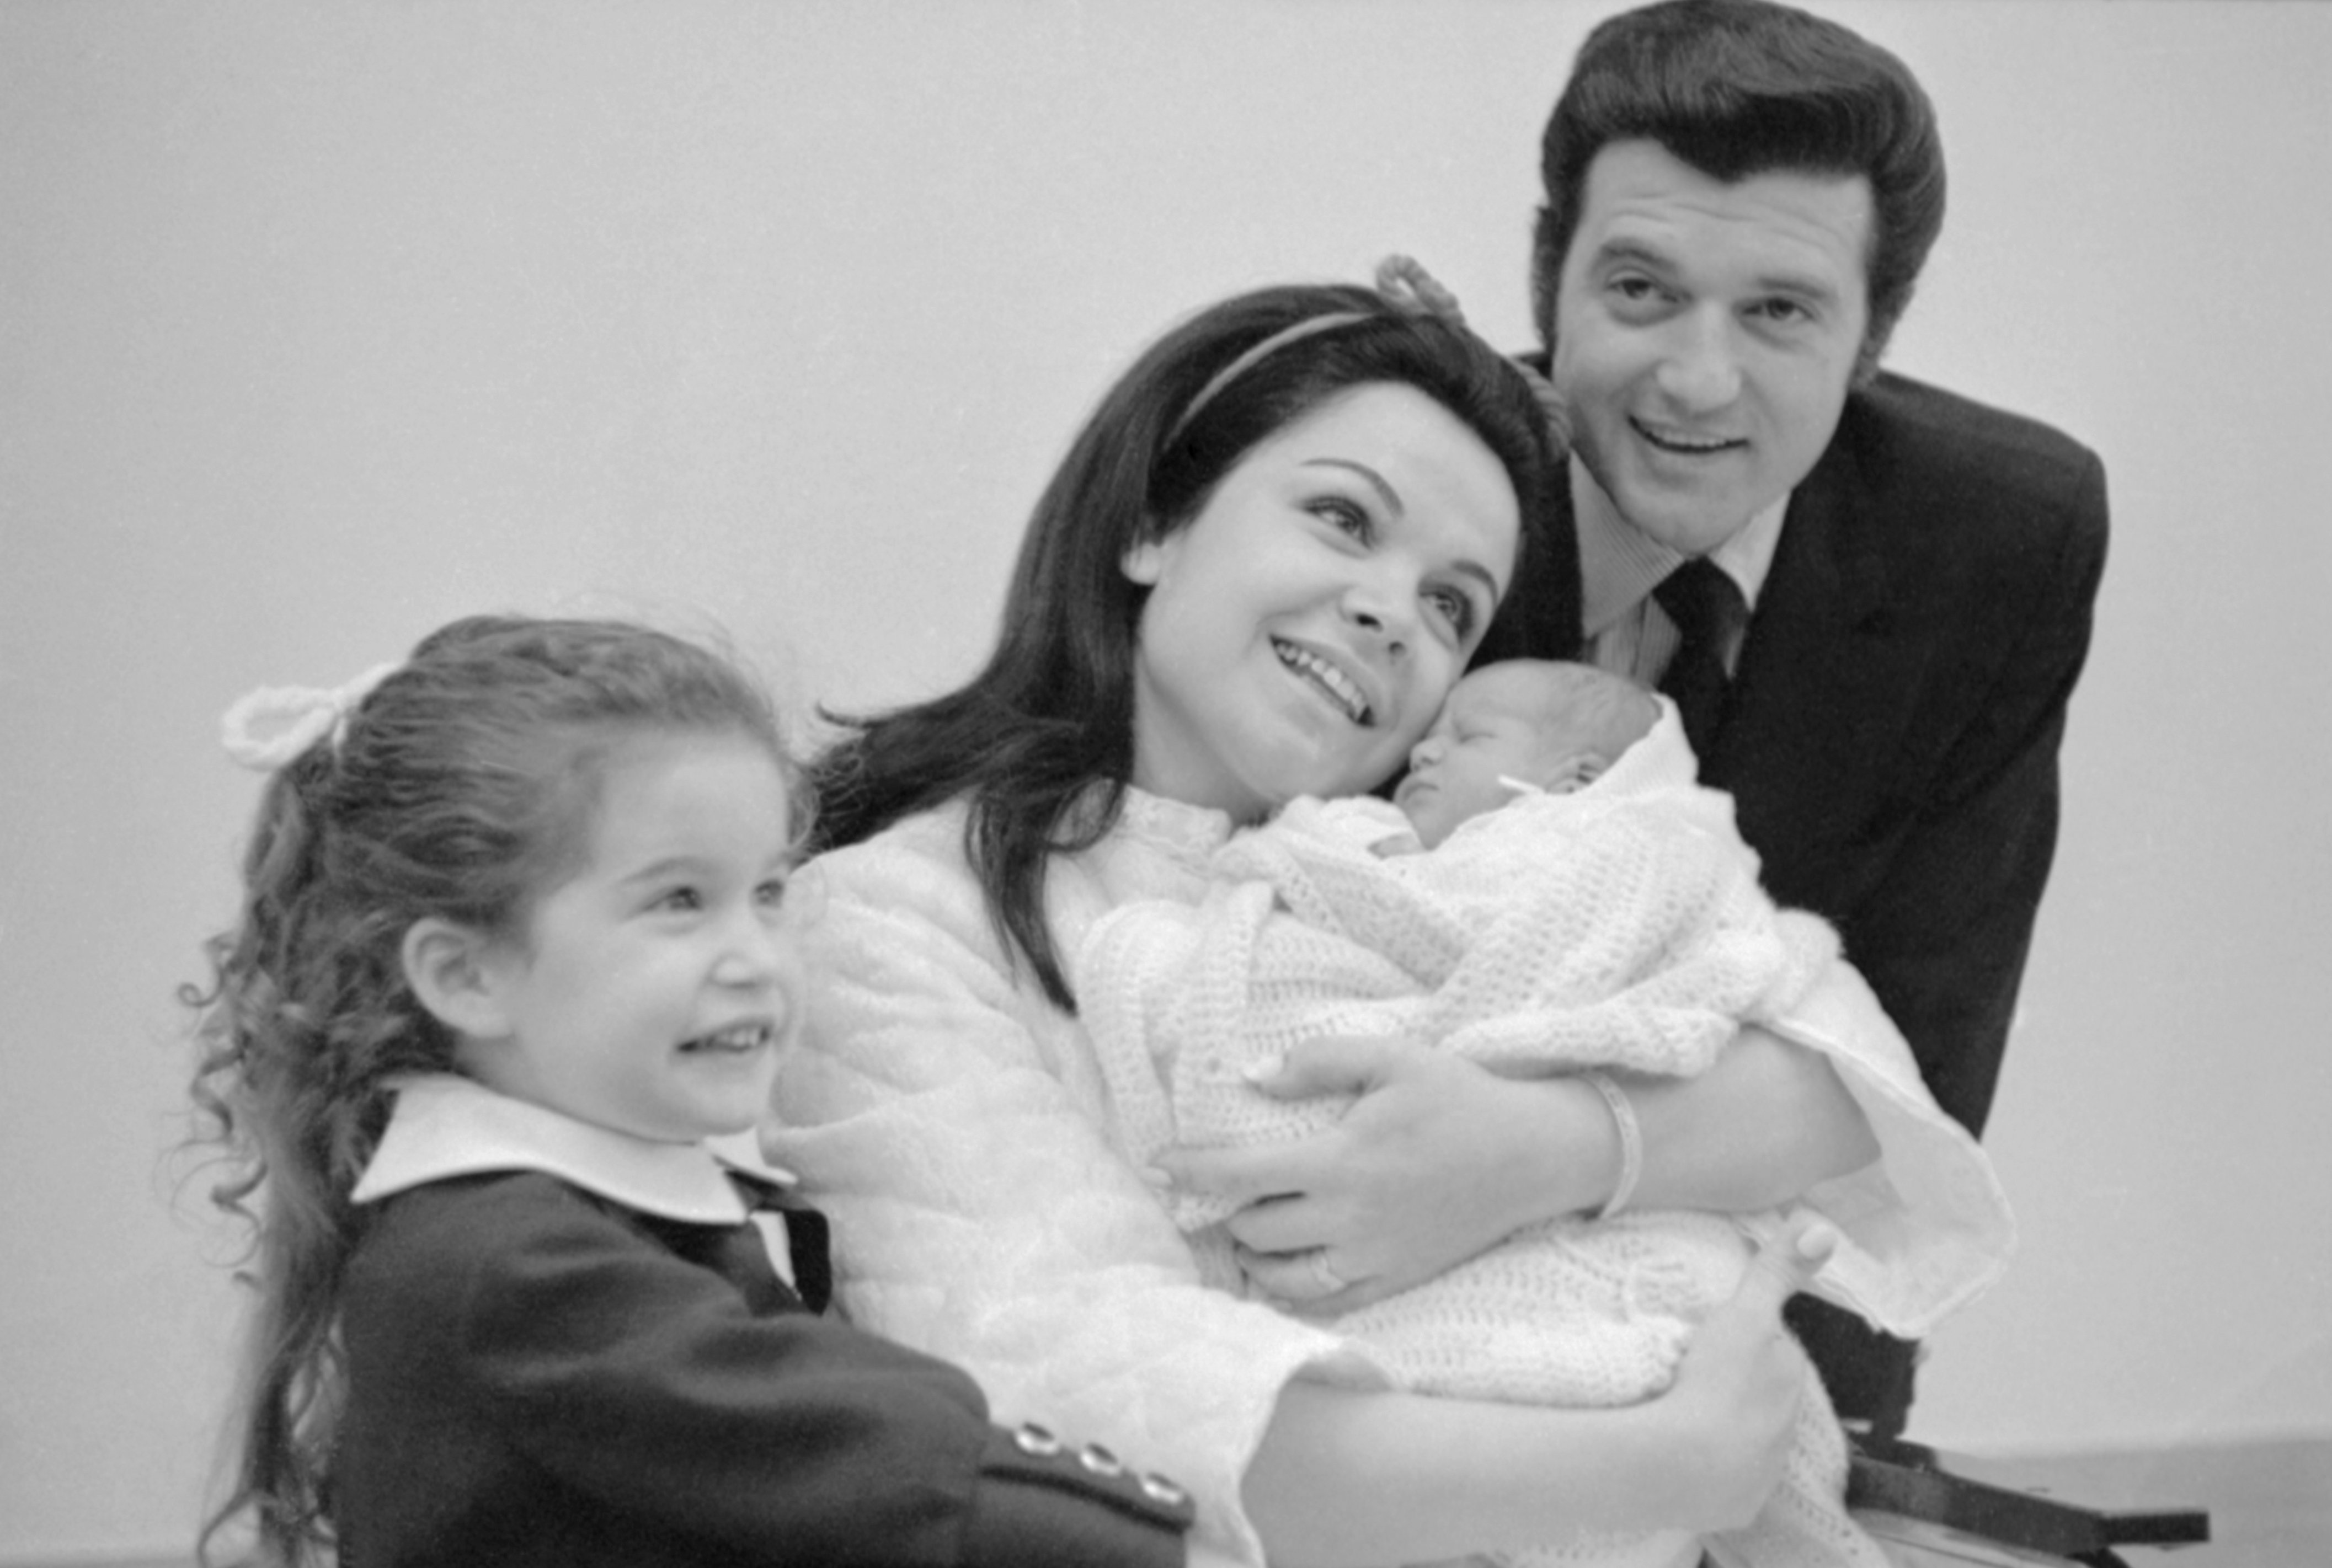 Annette Funicello cuddles her newborn son, Jack, Jr., at St. Joseph's Hospital. looking on is the proud father, Jack Gilardi, and their daughter, Gina, 4, 1970 | Source: Getty Images